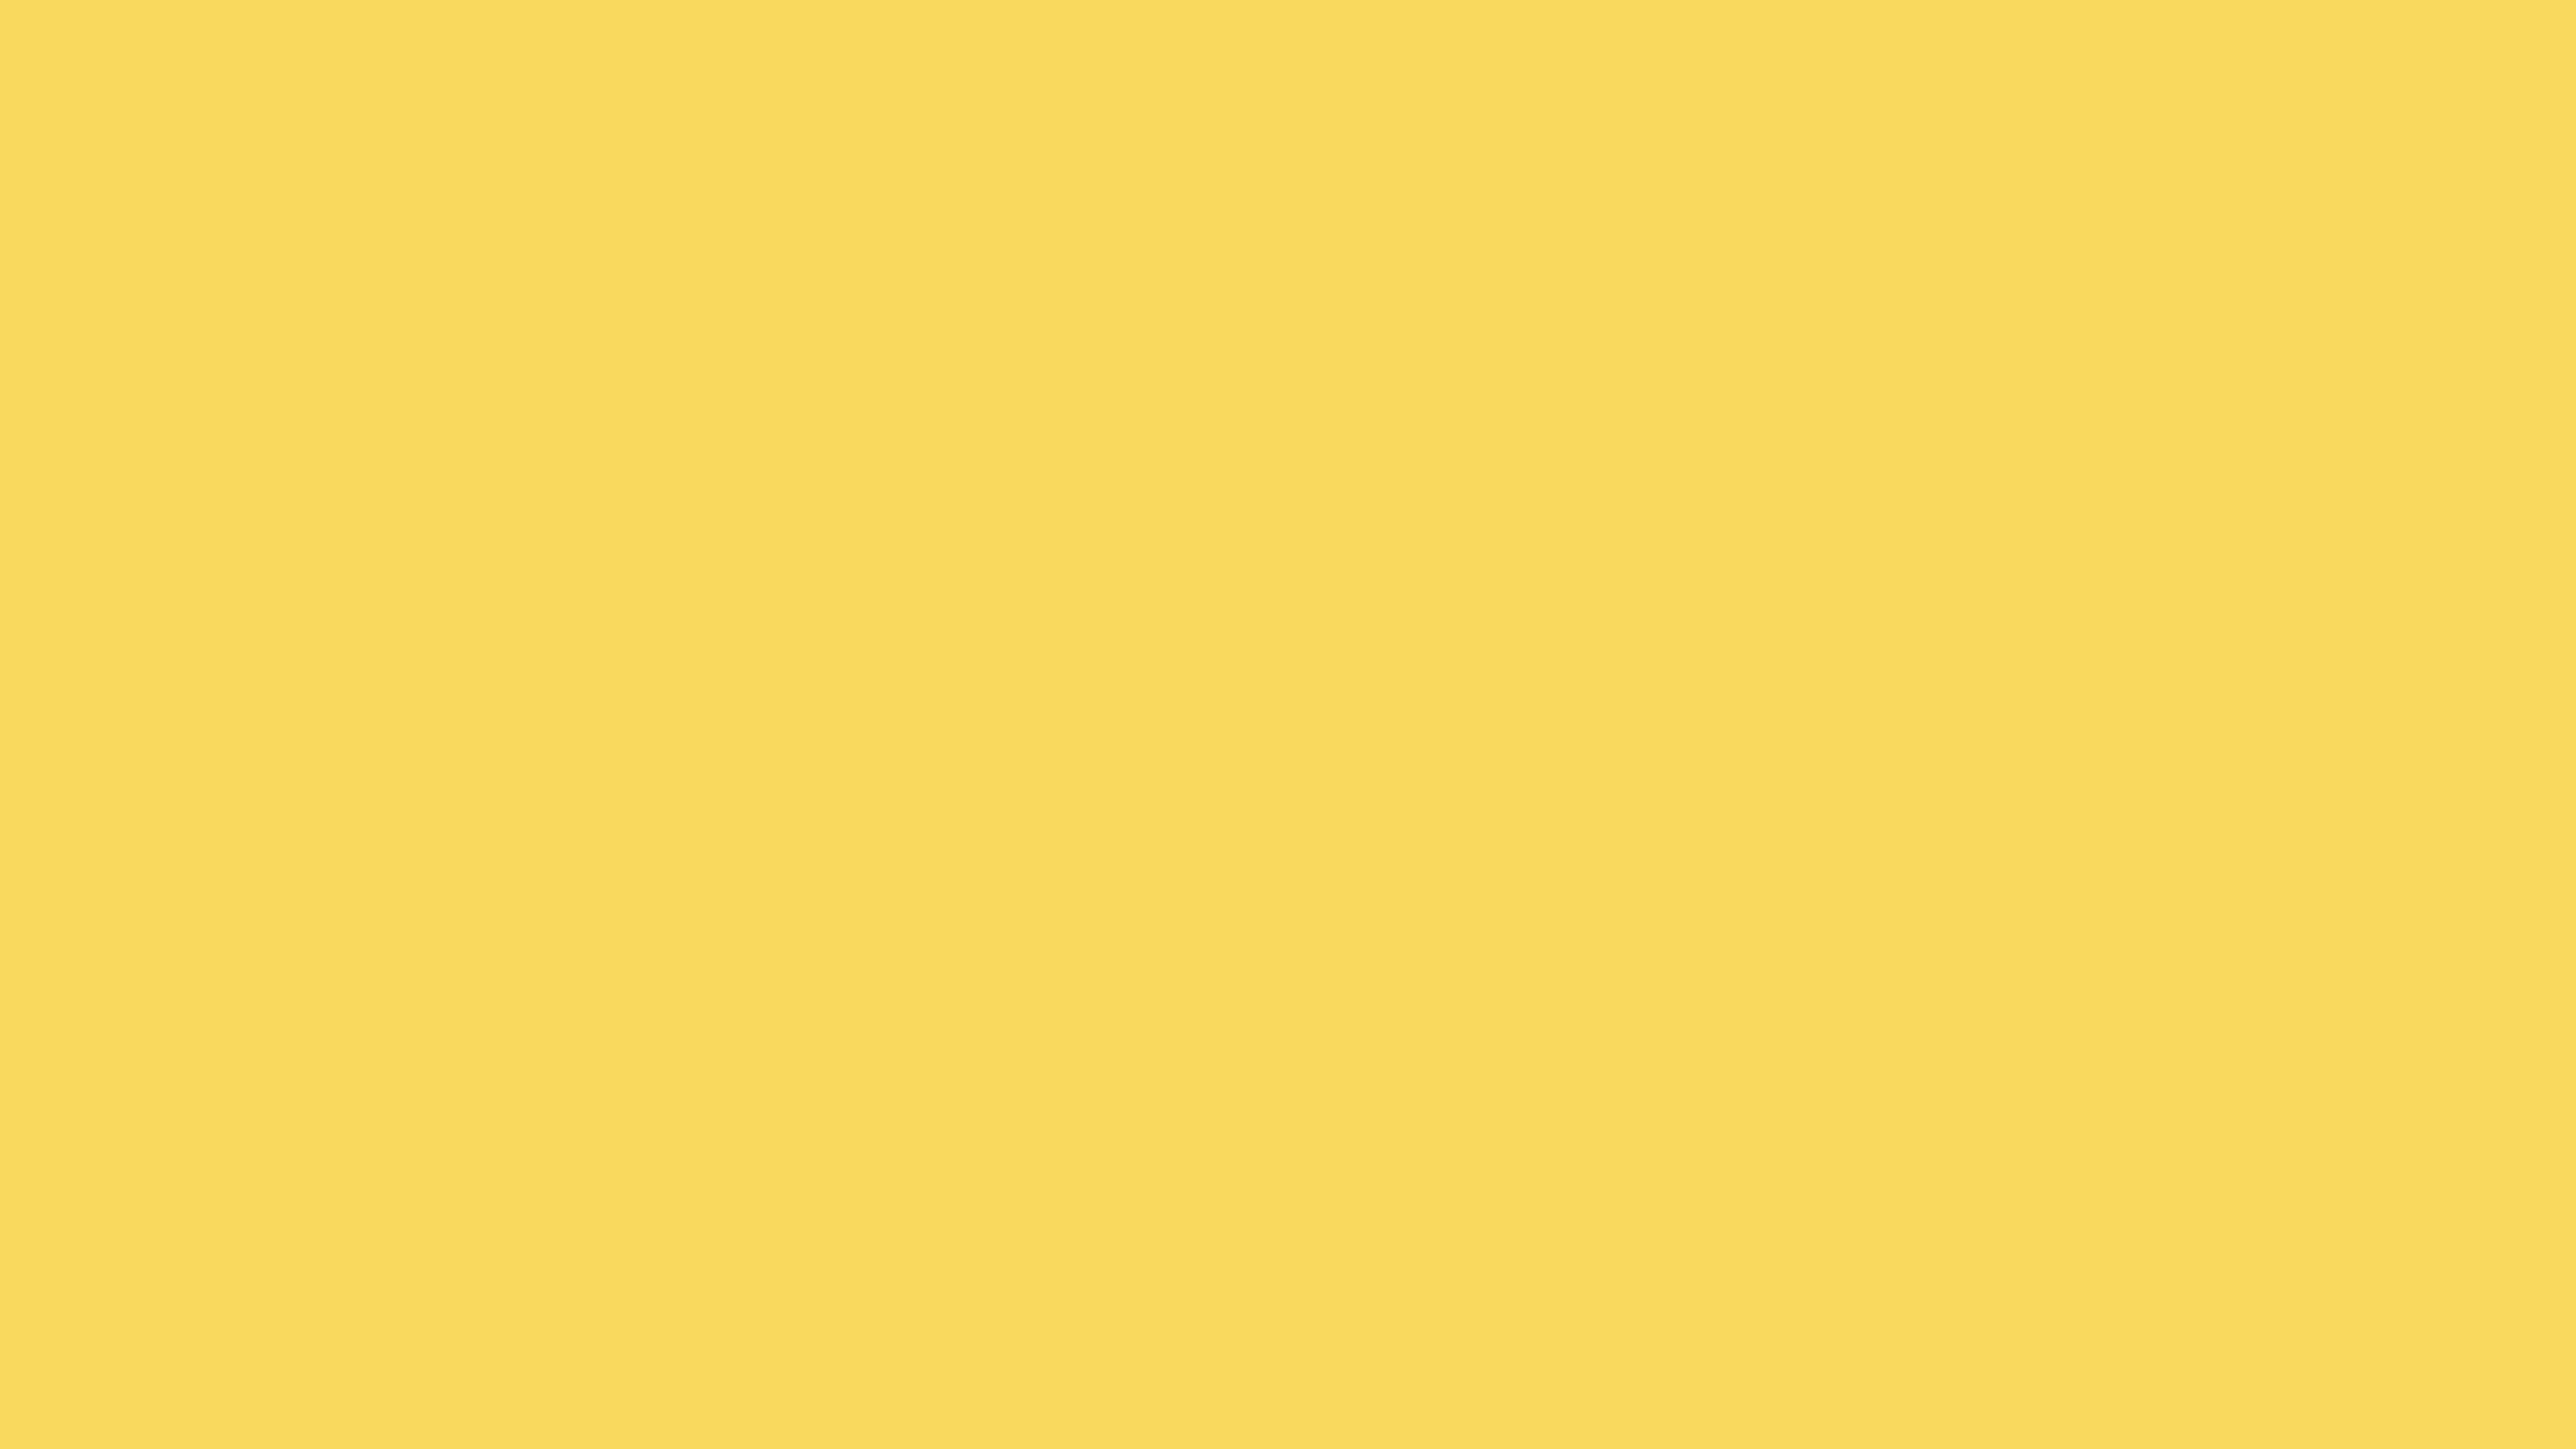 7680x4320 Royal Yellow Solid Color Background